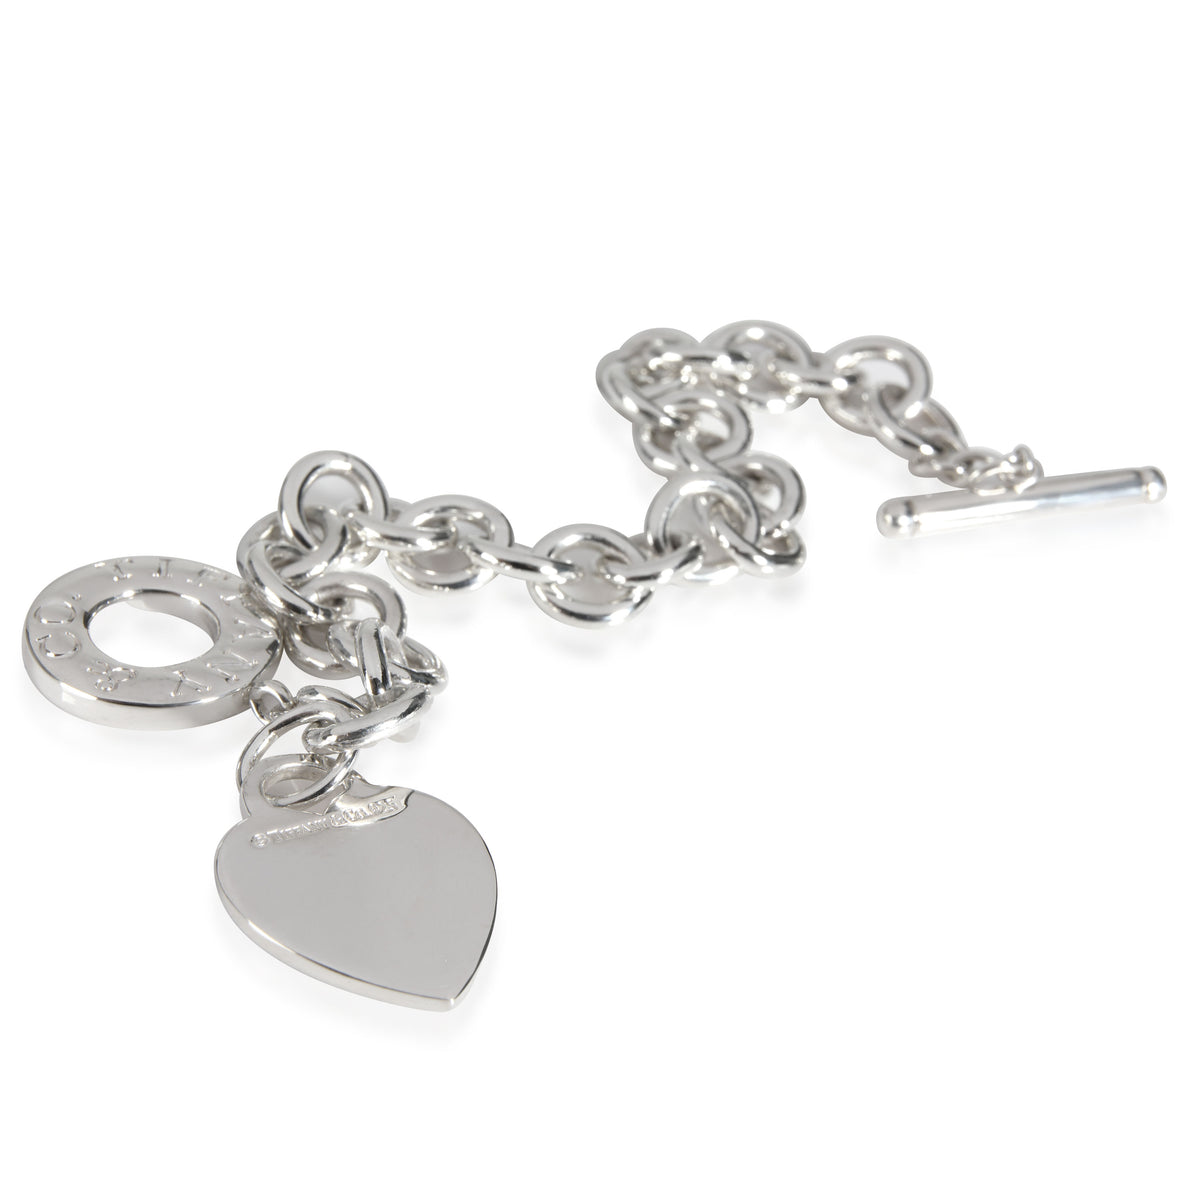 Tiffany & Co. Heart Tag Toggle Bracelet in Sterling Silver